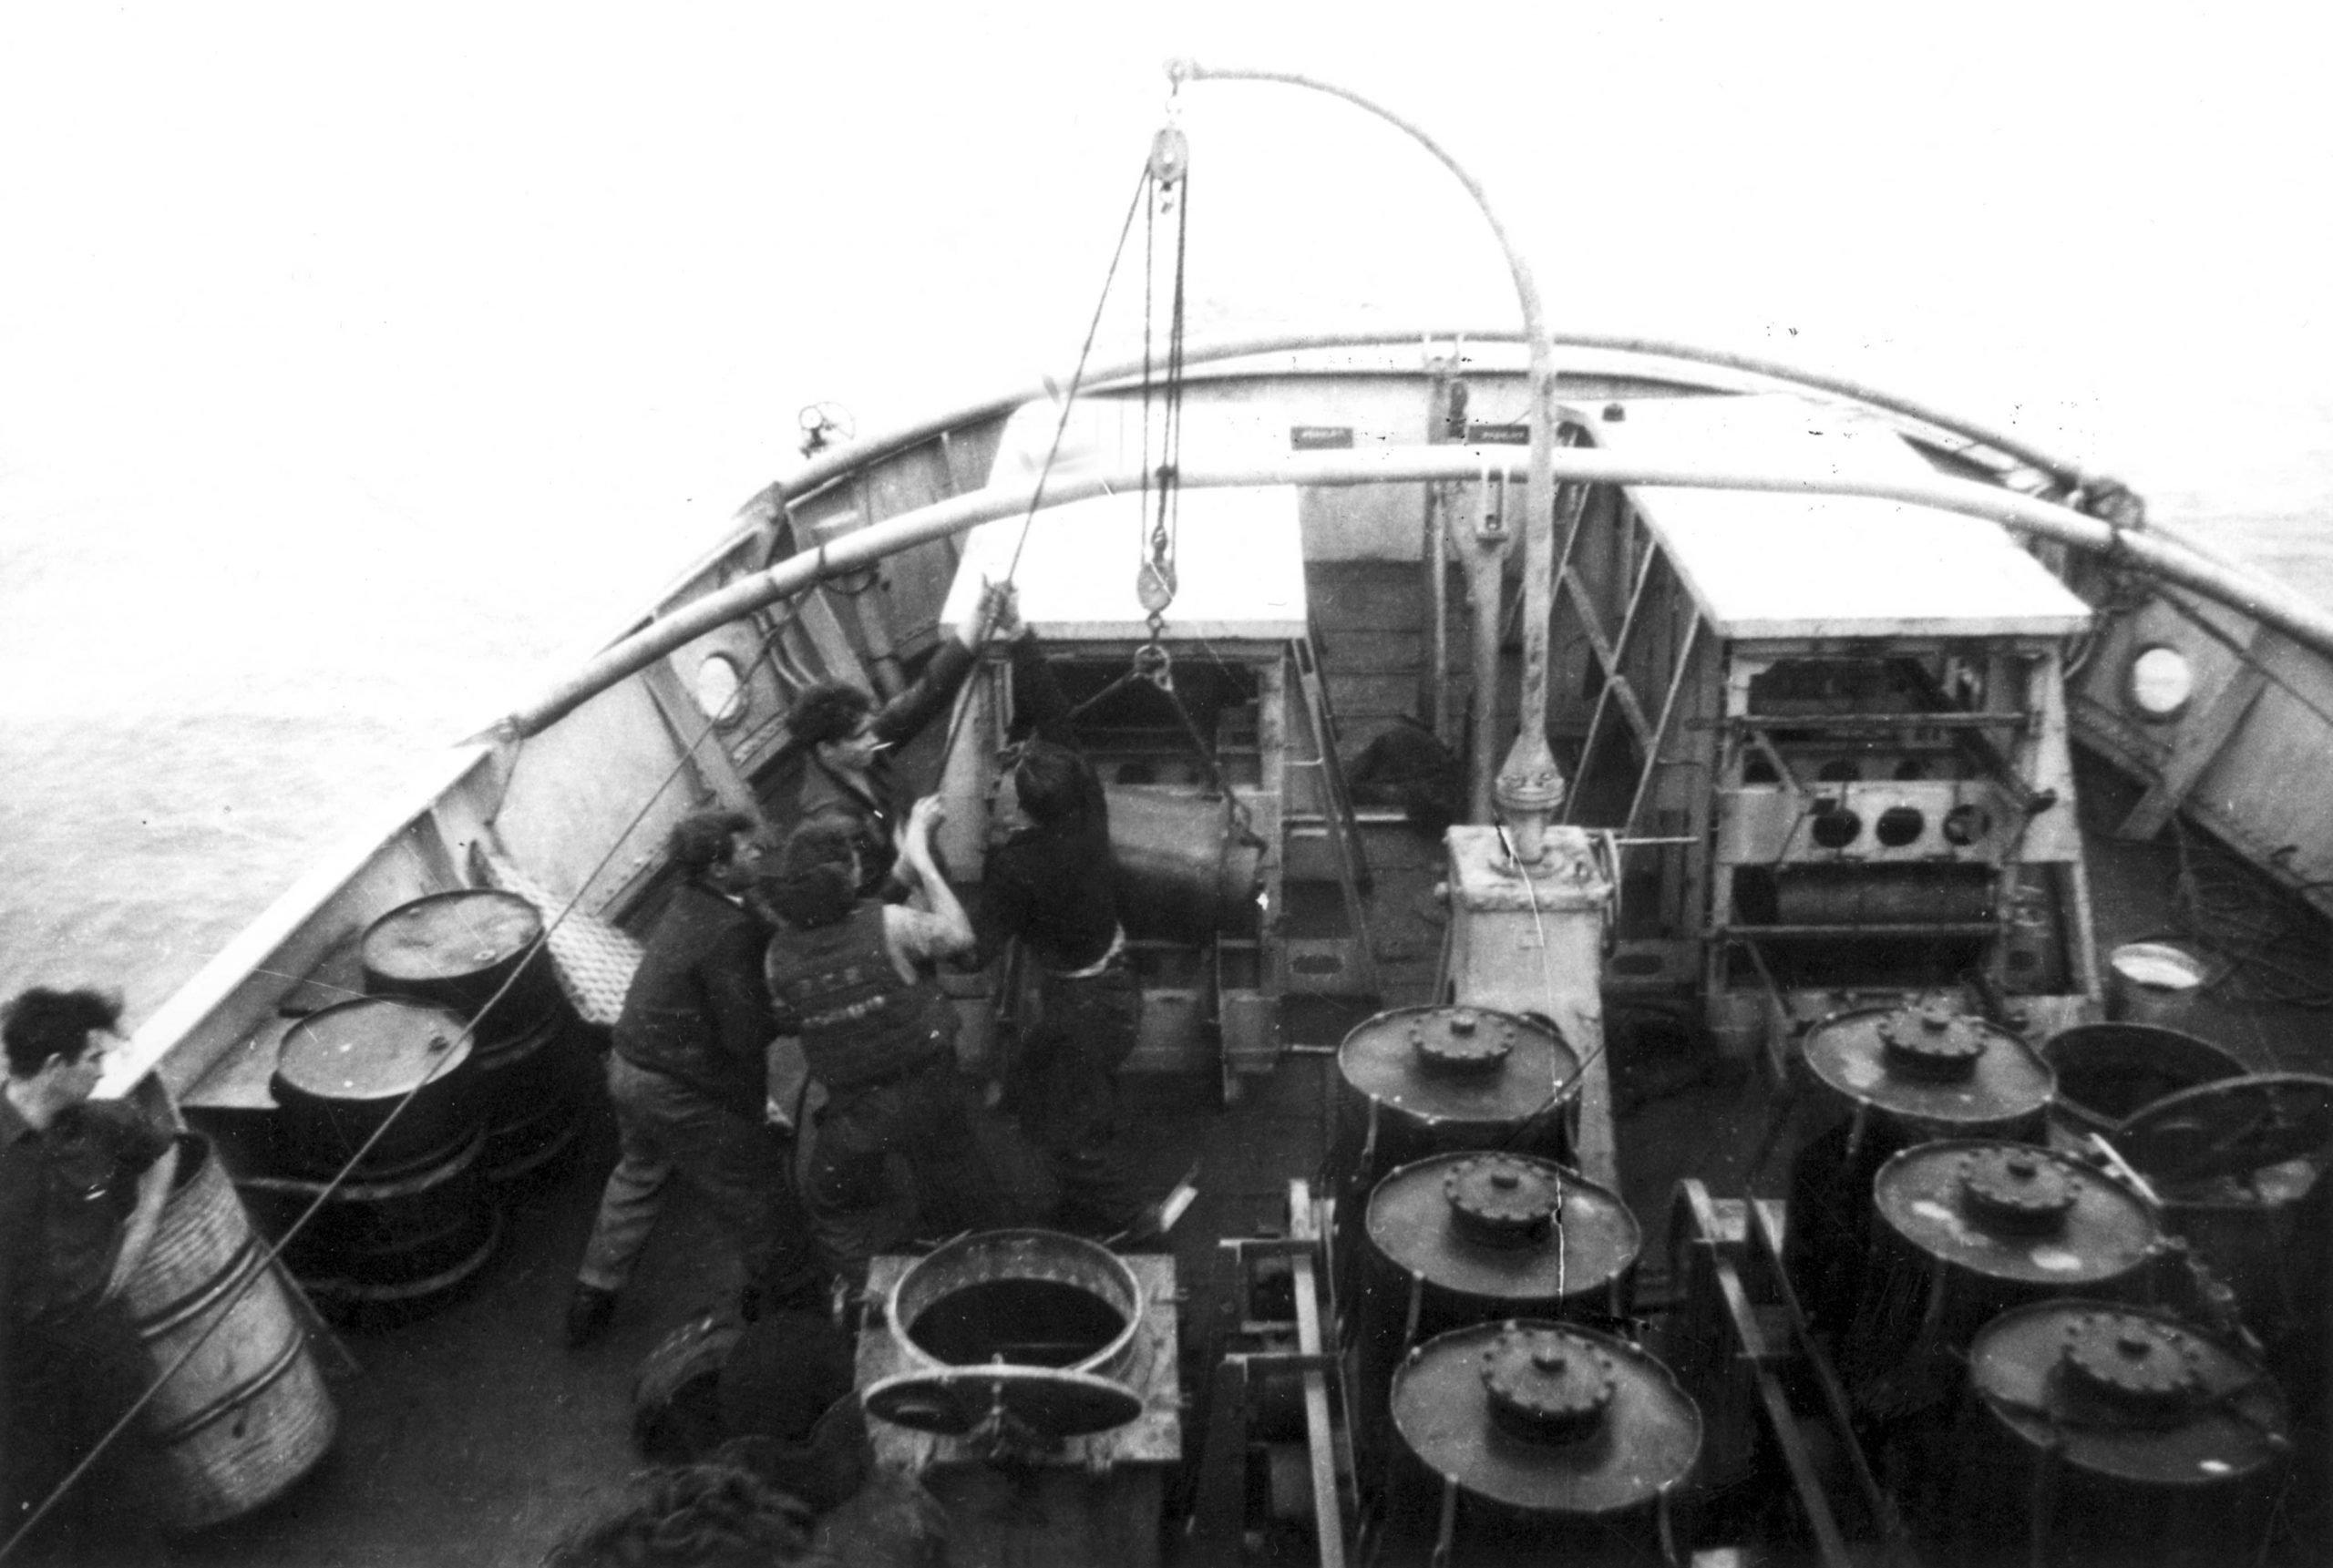 Sailors from the crew of the Canadian Quesnel corvette